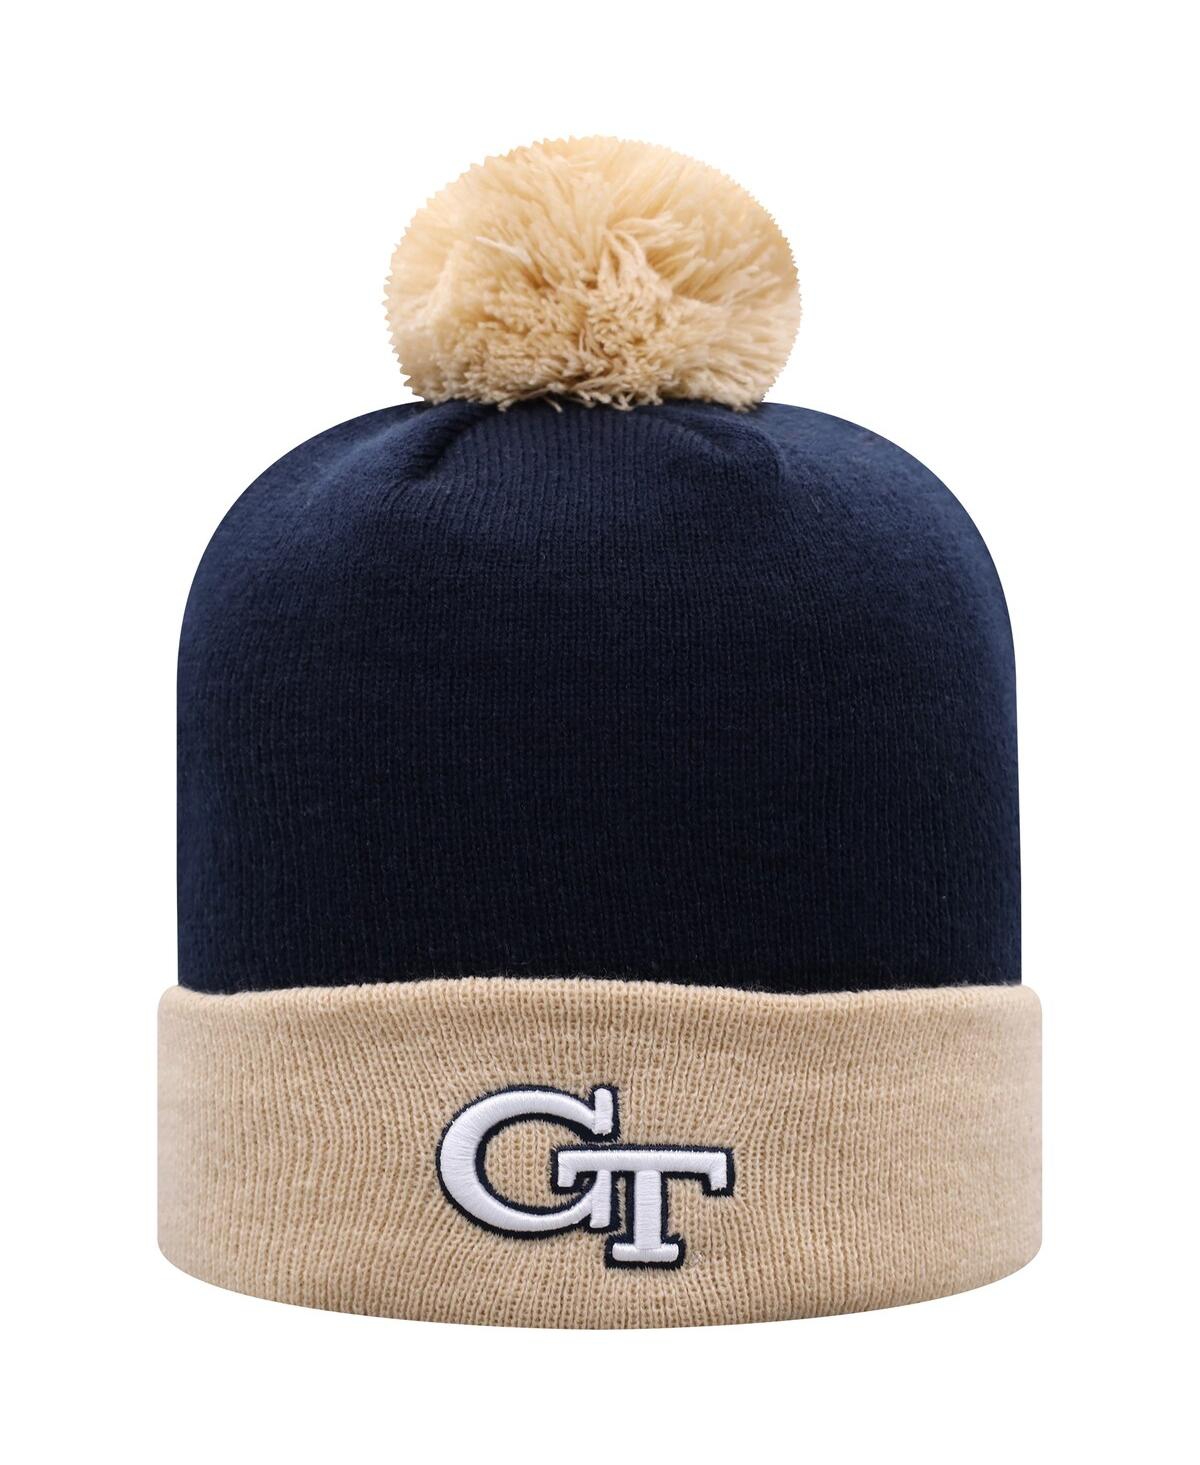 Men's Top of the World Navy and Gold Georgia Tech Yellow Jackets Core 2-Tone Cuffed Knit Hat with Pom - Navy, Gold